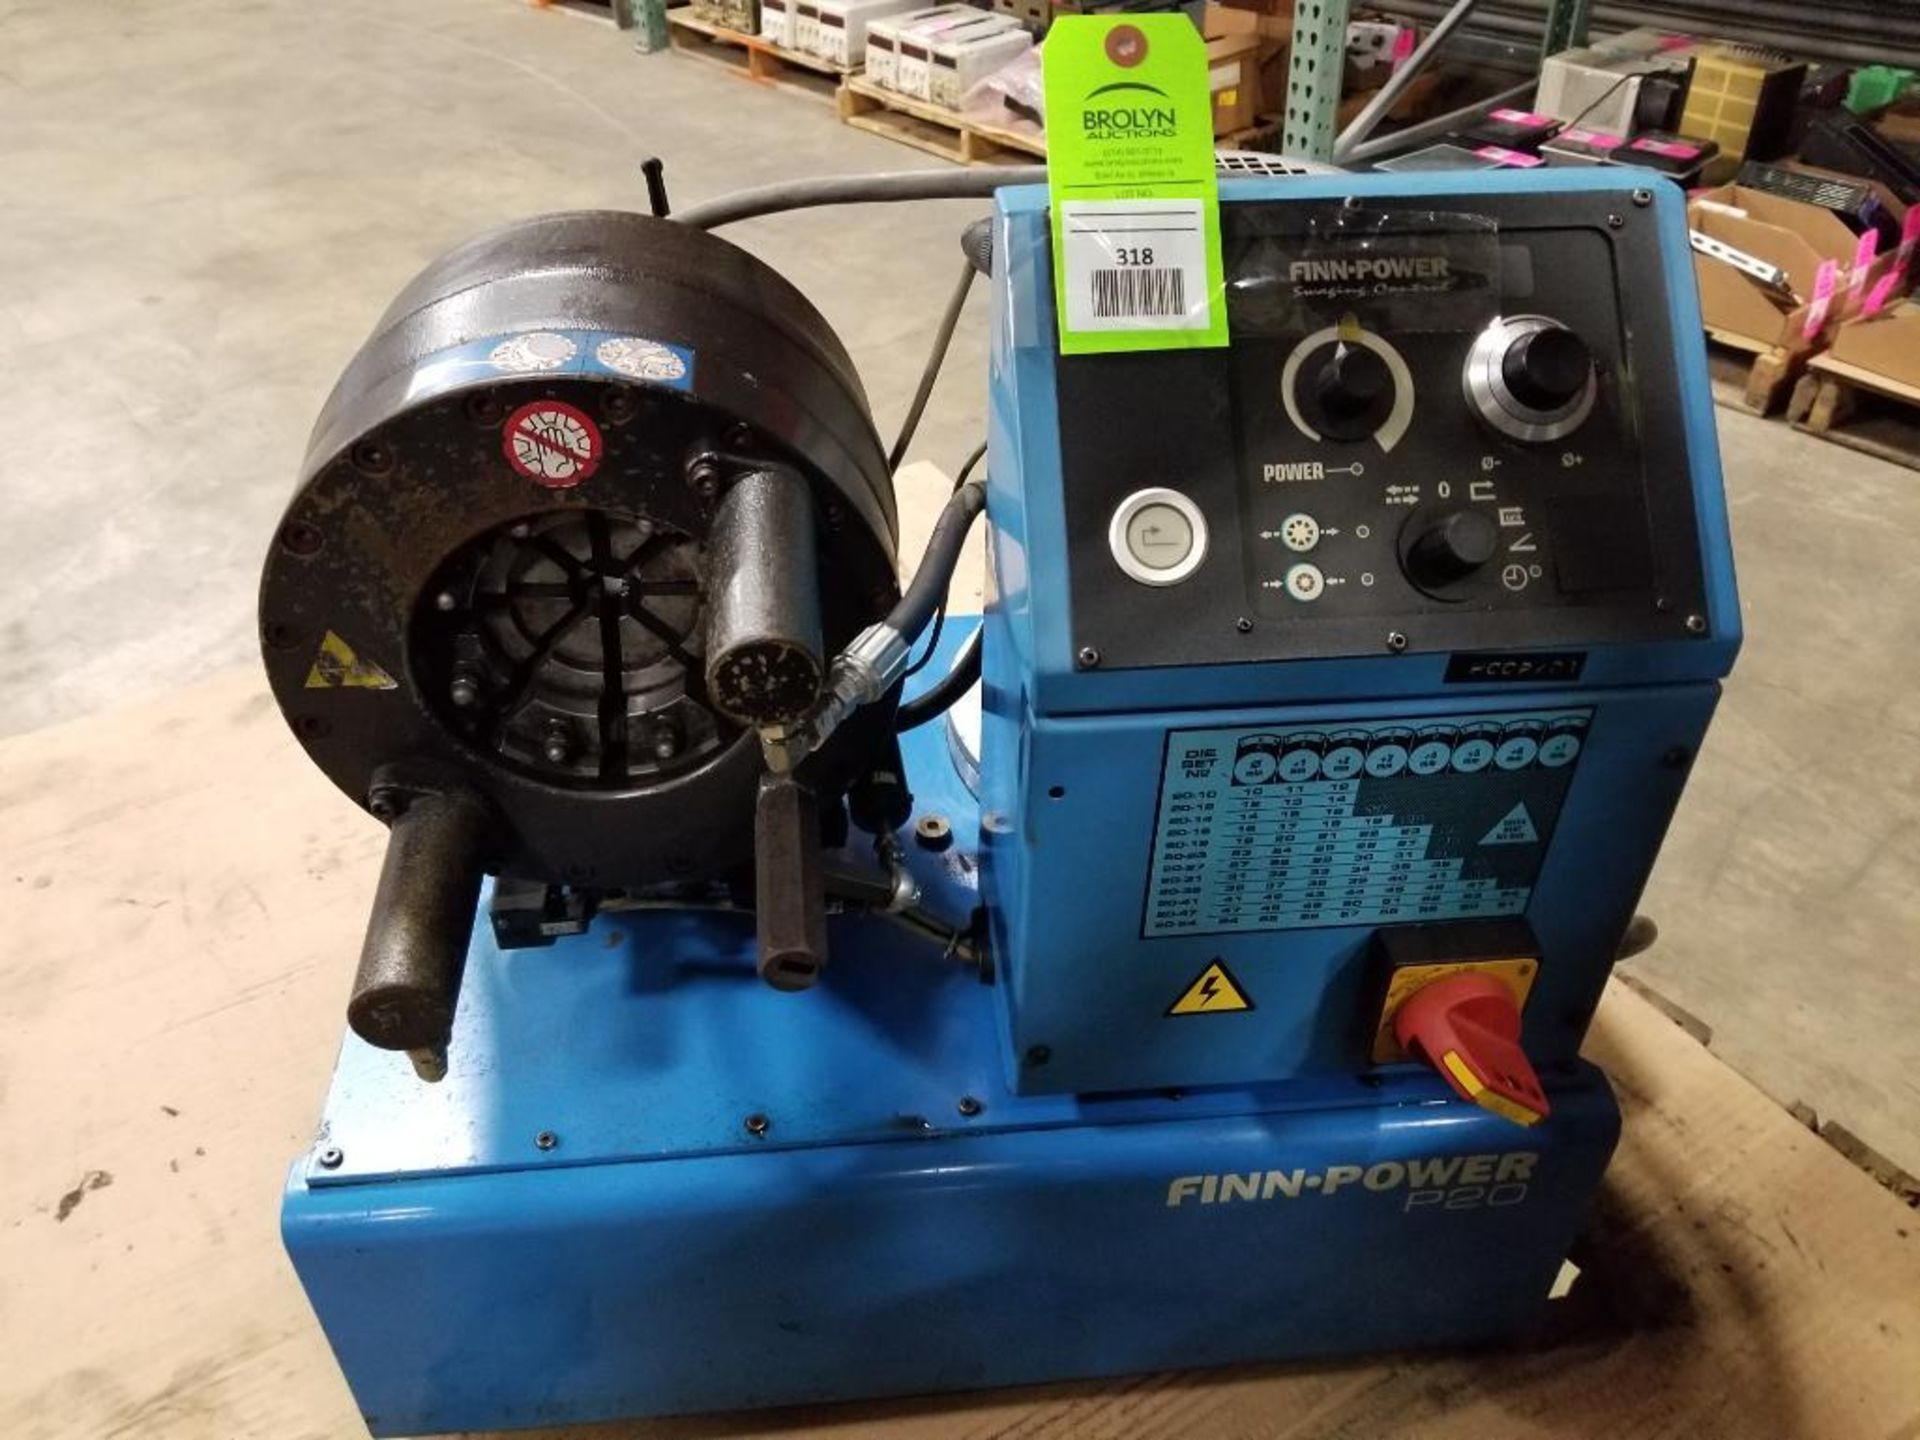 Finn-Power hydraulic swaging crimping machine. Model P20, Part number P20IS23. Mfg date 2005.